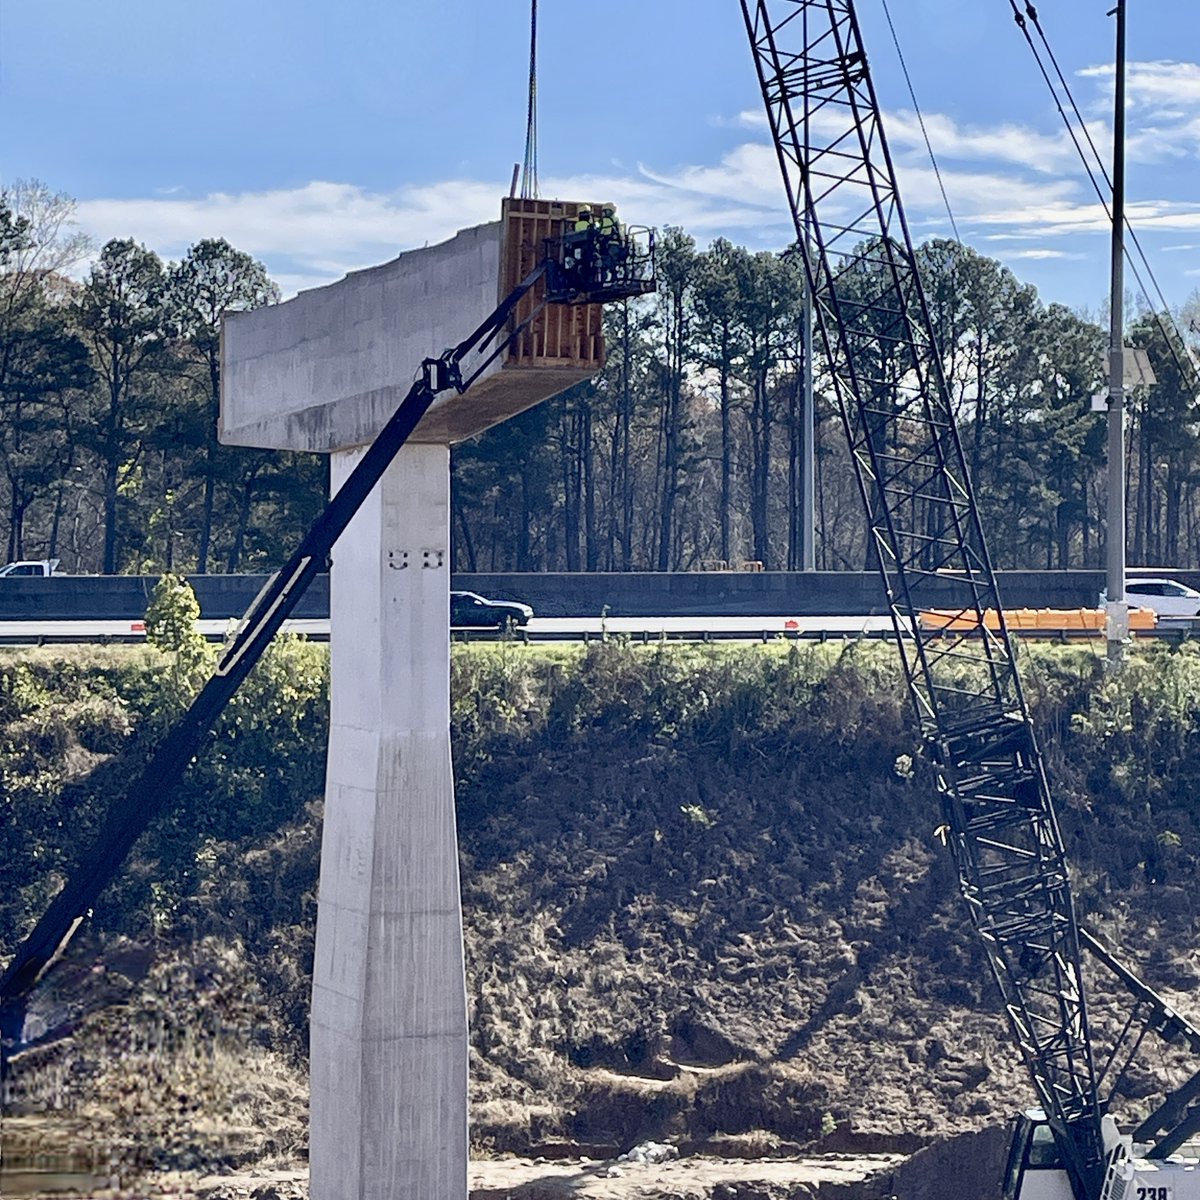 DeKalb! You may have noticed crews working on these new bridge columns and caps near the #28520EastInterchange.  The new flyover bridge will have ample clearance for motorists traveling through this interchange.  Keep calm & #DriveAlert!  bit.ly/285-20-East-IC